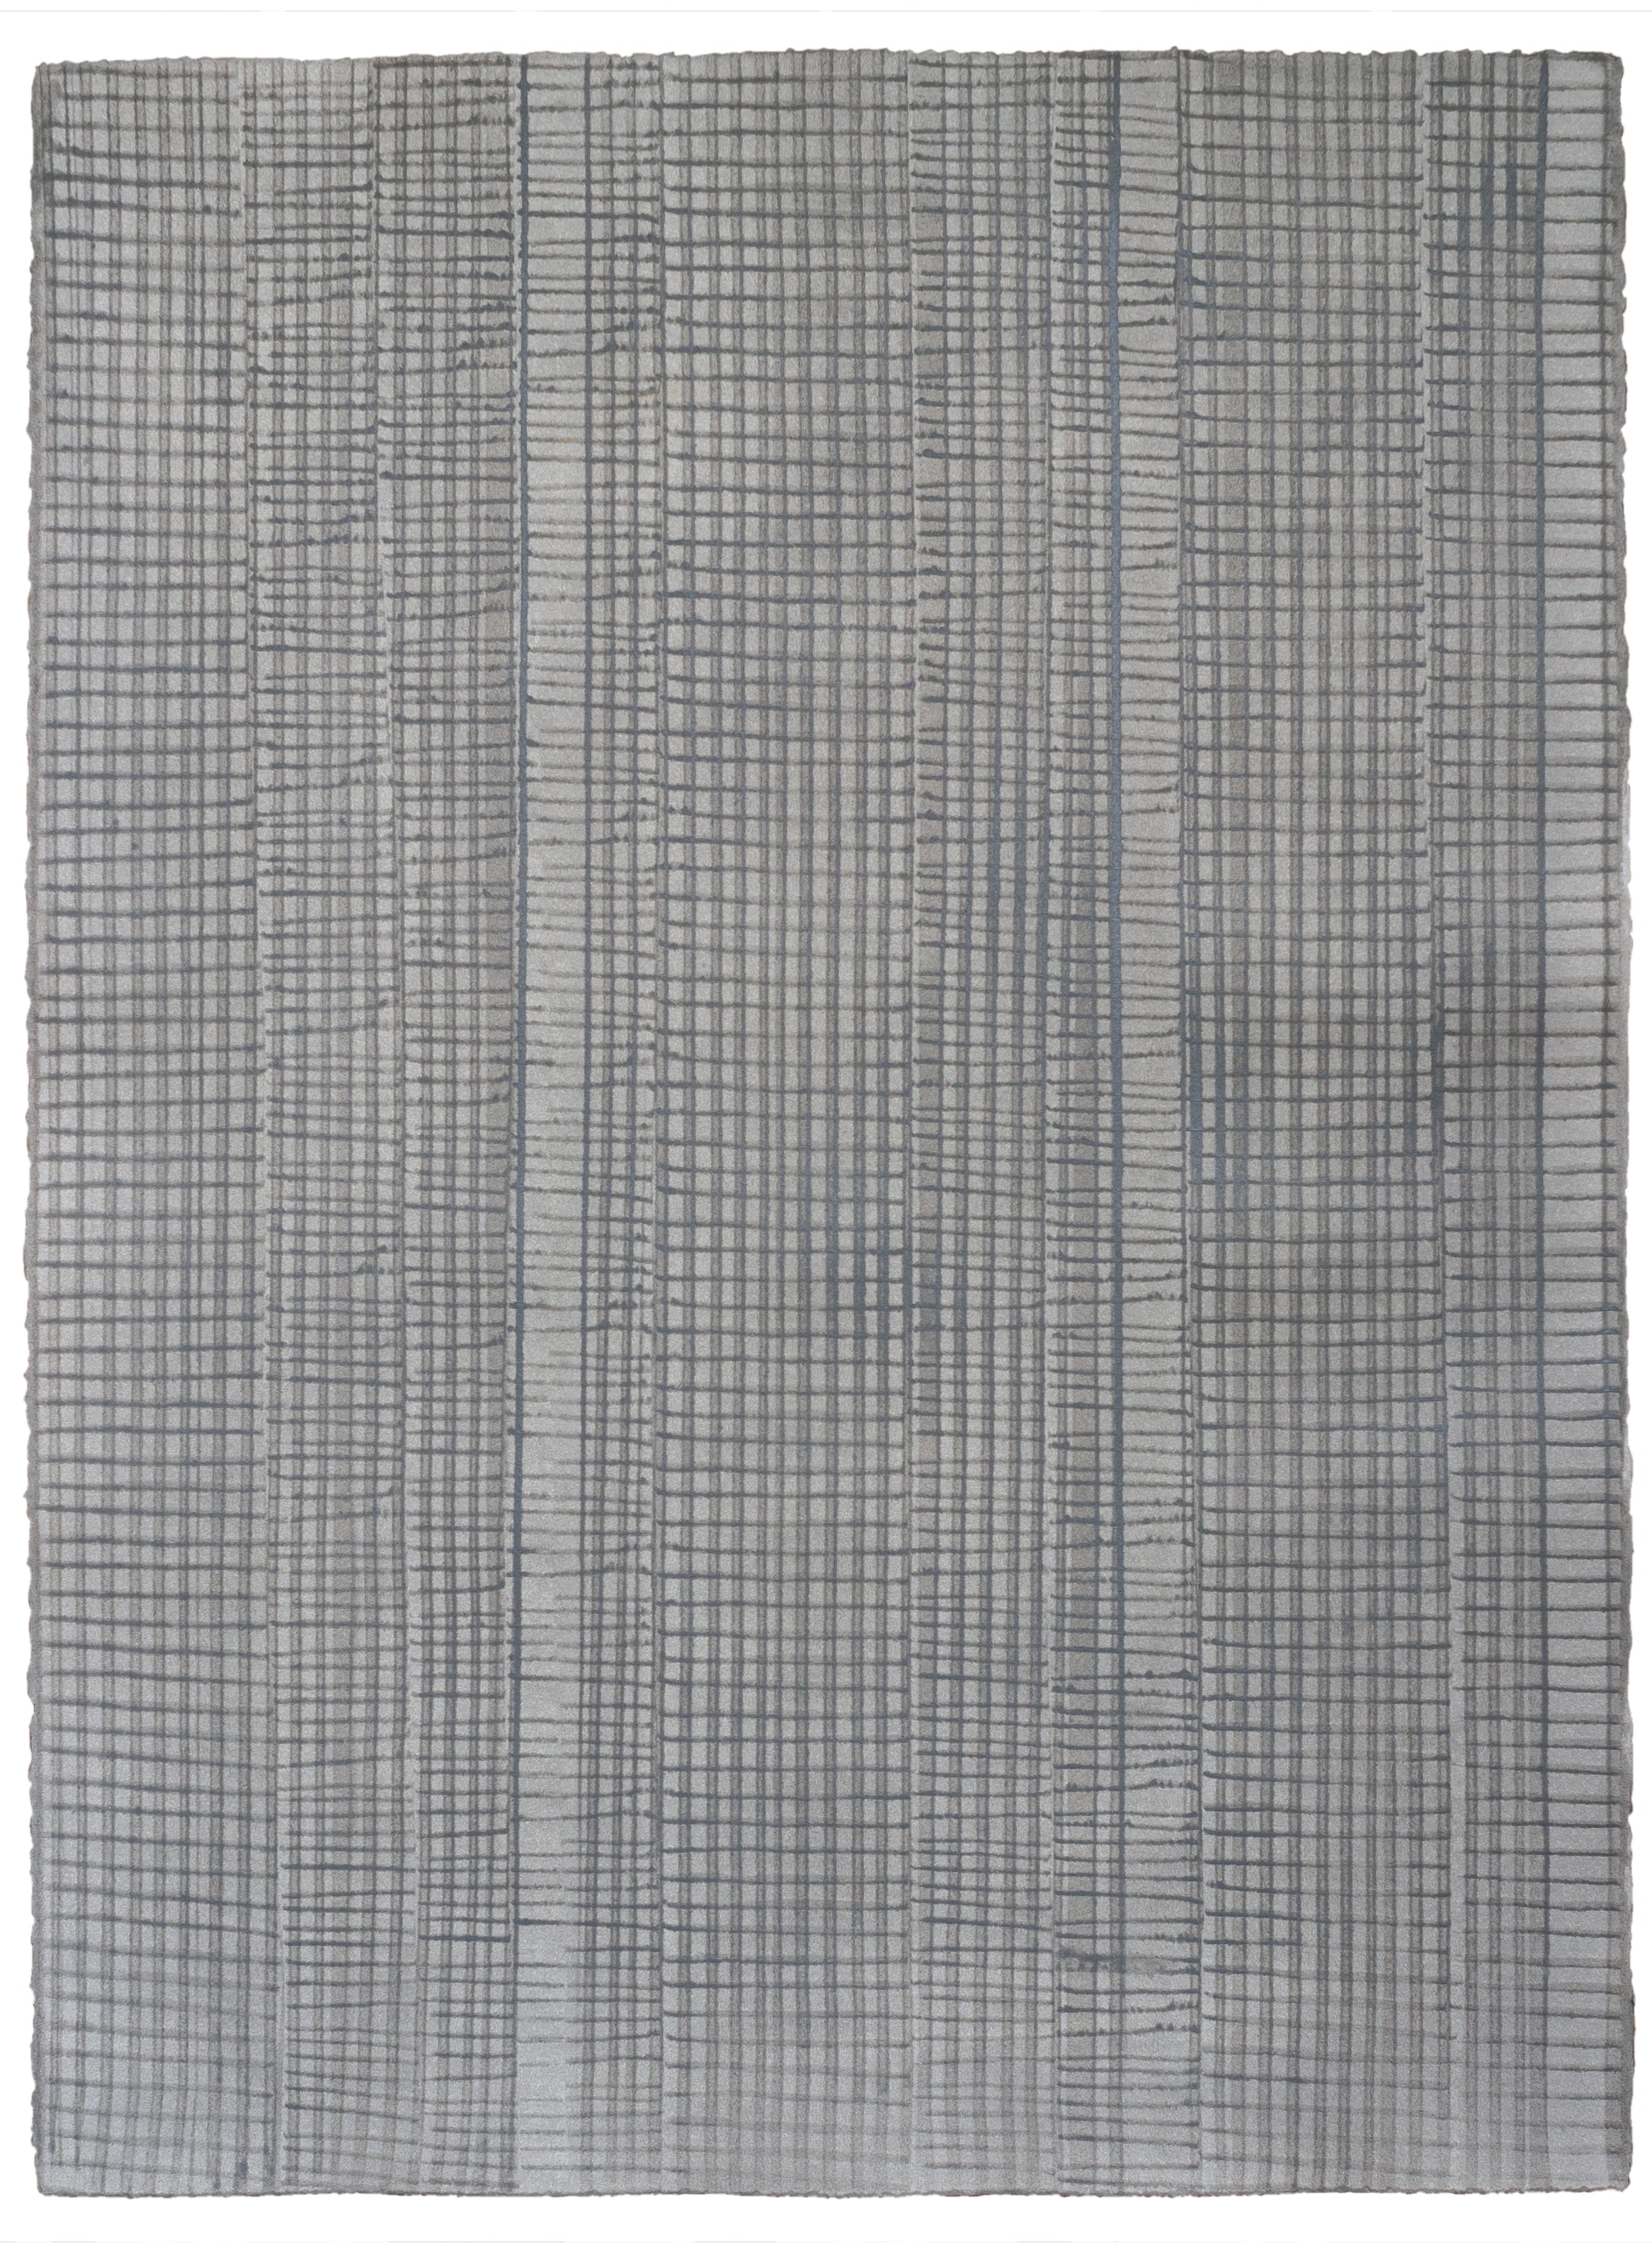 Sheet of hand-painted wallpaper with an irregular grid pattern in charcoal on a gray field.